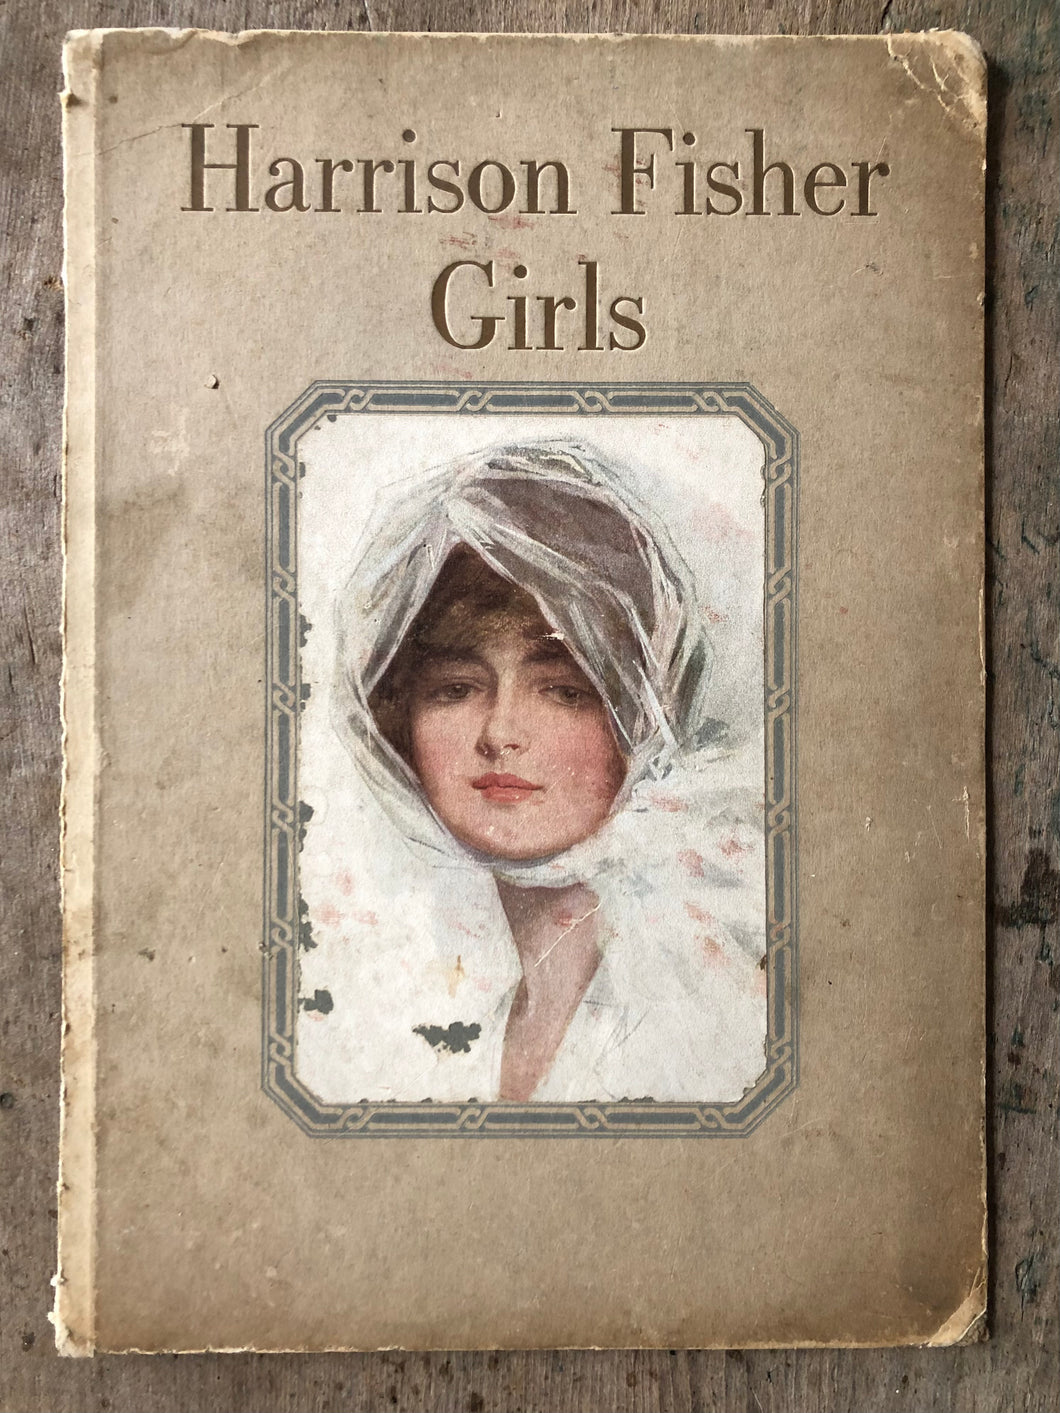 Cover of “Harrison Fisher Girls”